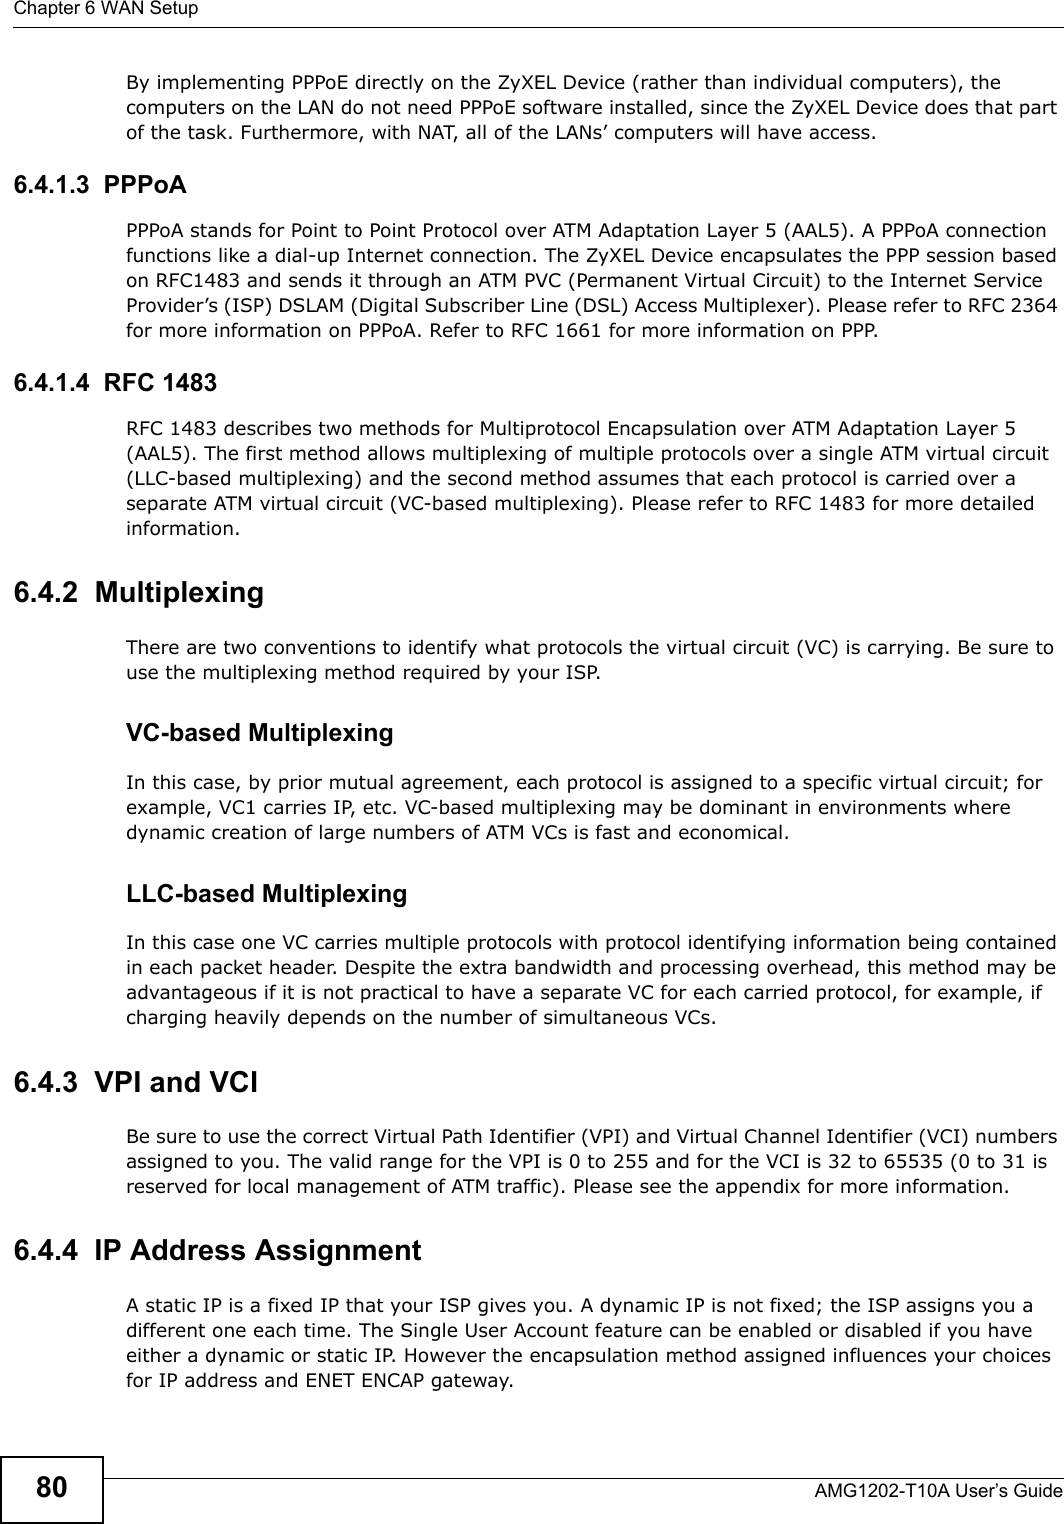 Chapter 6 WAN SetupAMG1202-T10A User’s Guide80By implementing PPPoE directly on the ZyXEL Device (rather than individual computers), the computers on the LAN do not need PPPoE software installed, since the ZyXEL Device does that part of the task. Furthermore, with NAT, all of the LANs’ computers will have access.6.4.1.3  PPPoAPPPoA stands for Point to Point Protocol over ATM Adaptation Layer 5 (AAL5). A PPPoA connection functions like a dial-up Internet connection. The ZyXEL Device encapsulates the PPP session based on RFC1483 and sends it through an ATM PVC (Permanent Virtual Circuit) to the Internet Service Provider’s (ISP) DSLAM (Digital Subscriber Line (DSL) Access Multiplexer). Please refer to RFC 2364 for more information on PPPoA. Refer to RFC 1661 for more information on PPP.6.4.1.4  RFC 1483RFC 1483 describes two methods for Multiprotocol Encapsulation over ATM Adaptation Layer 5 (AAL5). The first method allows multiplexing of multiple protocols over a single ATM virtual circuit (LLC-based multiplexing) and the second method assumes that each protocol is carried over a separate ATM virtual circuit (VC-based multiplexing). Please refer to RFC 1483 for more detailed information.6.4.2  MultiplexingThere are two conventions to identify what protocols the virtual circuit (VC) is carrying. Be sure to use the multiplexing method required by your ISP.VC-based MultiplexingIn this case, by prior mutual agreement, each protocol is assigned to a specific virtual circuit; for example, VC1 carries IP, etc. VC-based multiplexing may be dominant in environments where dynamic creation of large numbers of ATM VCs is fast and economical.LLC-based MultiplexingIn this case one VC carries multiple protocols with protocol identifying information being contained in each packet header. Despite the extra bandwidth and processing overhead, this method may be advantageous if it is not practical to have a separate VC for each carried protocol, for example, if charging heavily depends on the number of simultaneous VCs.6.4.3  VPI and VCIBe sure to use the correct Virtual Path Identifier (VPI) and Virtual Channel Identifier (VCI) numbers assigned to you. The valid range for the VPI is 0 to 255 and for the VCI is 32 to 65535 (0 to 31 is reserved for local management of ATM traffic). Please see the appendix for more information.6.4.4  IP Address AssignmentA static IP is a fixed IP that your ISP gives you. A dynamic IP is not fixed; the ISP assigns you a different one each time. The Single User Account feature can be enabled or disabled if you have either a dynamic or static IP. However the encapsulation method assigned influences your choices for IP address and ENET ENCAP gateway.